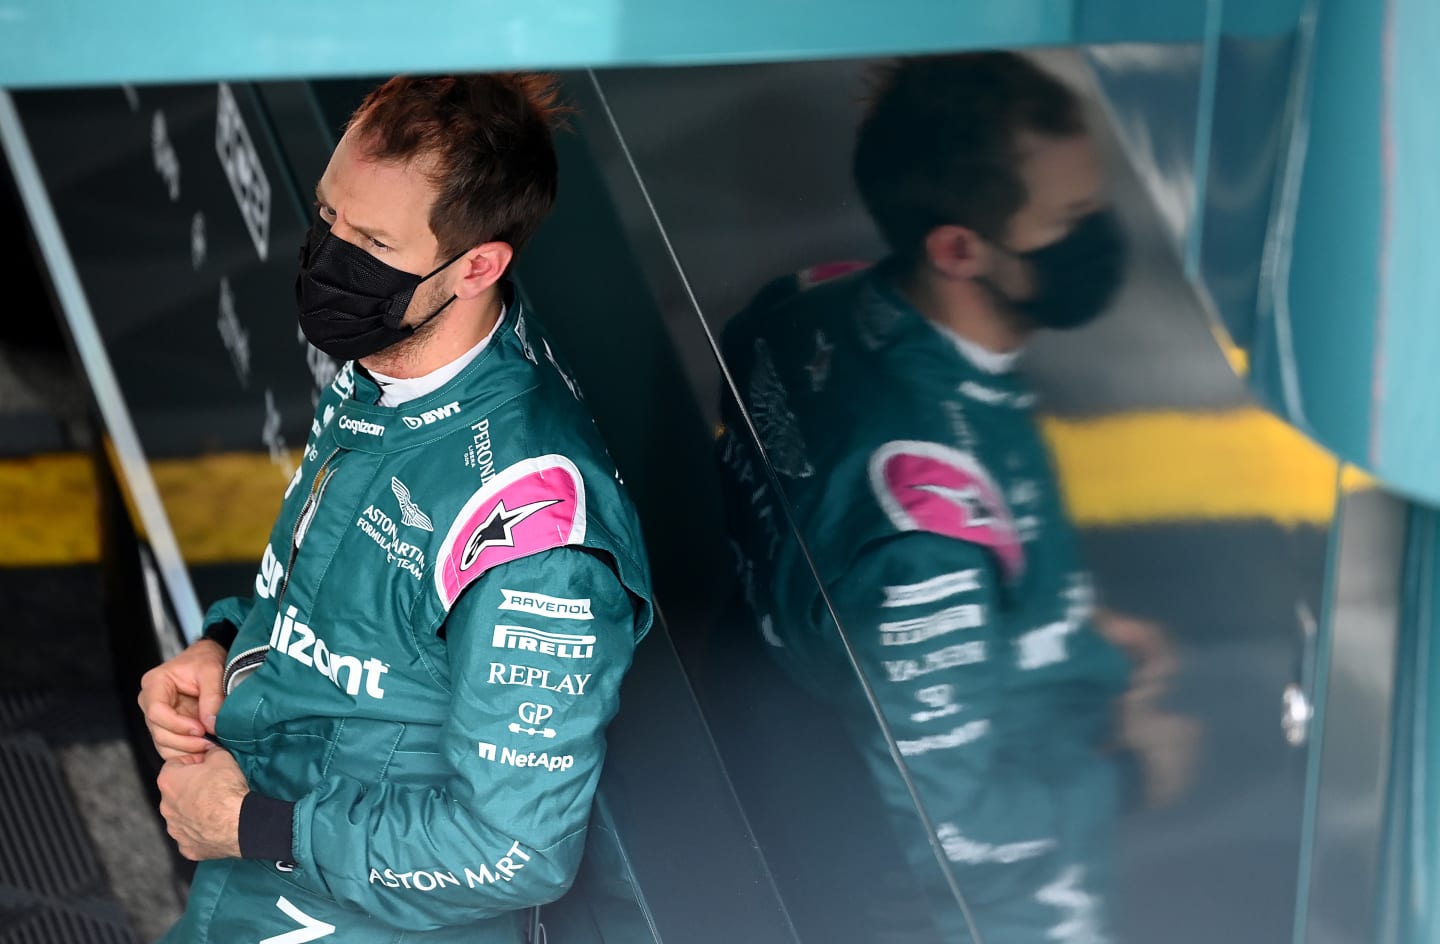 IMOLA, ITALY - APRIL 17: Sebastian Vettel of Germany and Aston Martin F1 Team looks on in the Paddock during final practice ahead of the F1 Grand Prix of Emilia Romagna at Autodromo Enzo e Dino Ferrari on April 17, 2021 in Imola, Italy. (Photo by Clive Mason - Formula 1/Formula 1 via Getty Images)